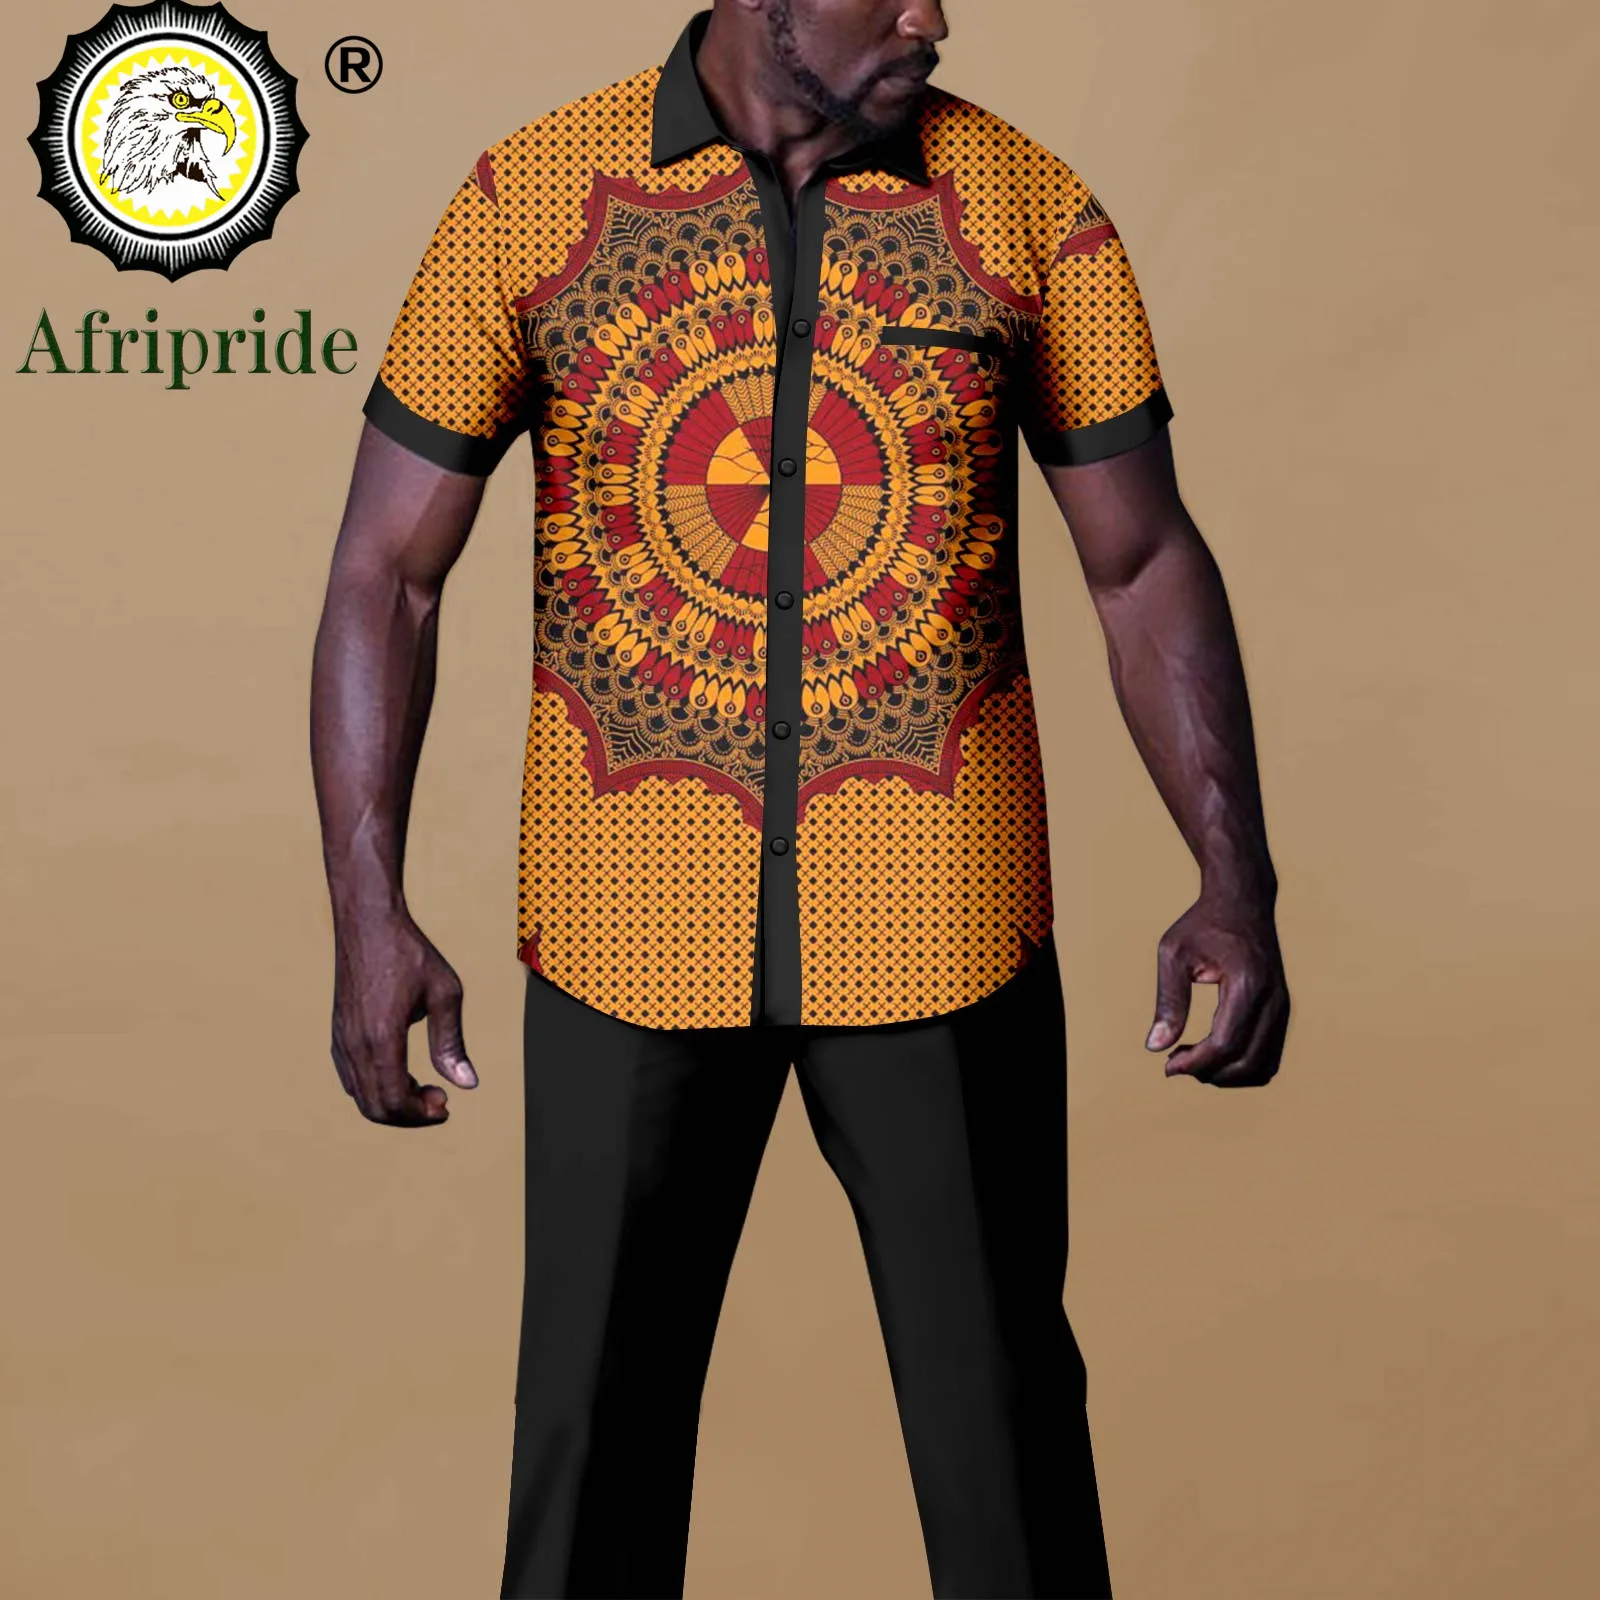 African Outfits for Men Tracksuit Short Sleeve Print Shirts and Pants Set Dashiki Outfits Plus Size Casual Sweatsuits A2216089 bazin riche african traditional clothes for men dashiki shirts and pants 2 piece set african suit tribal tracksuit a2316003